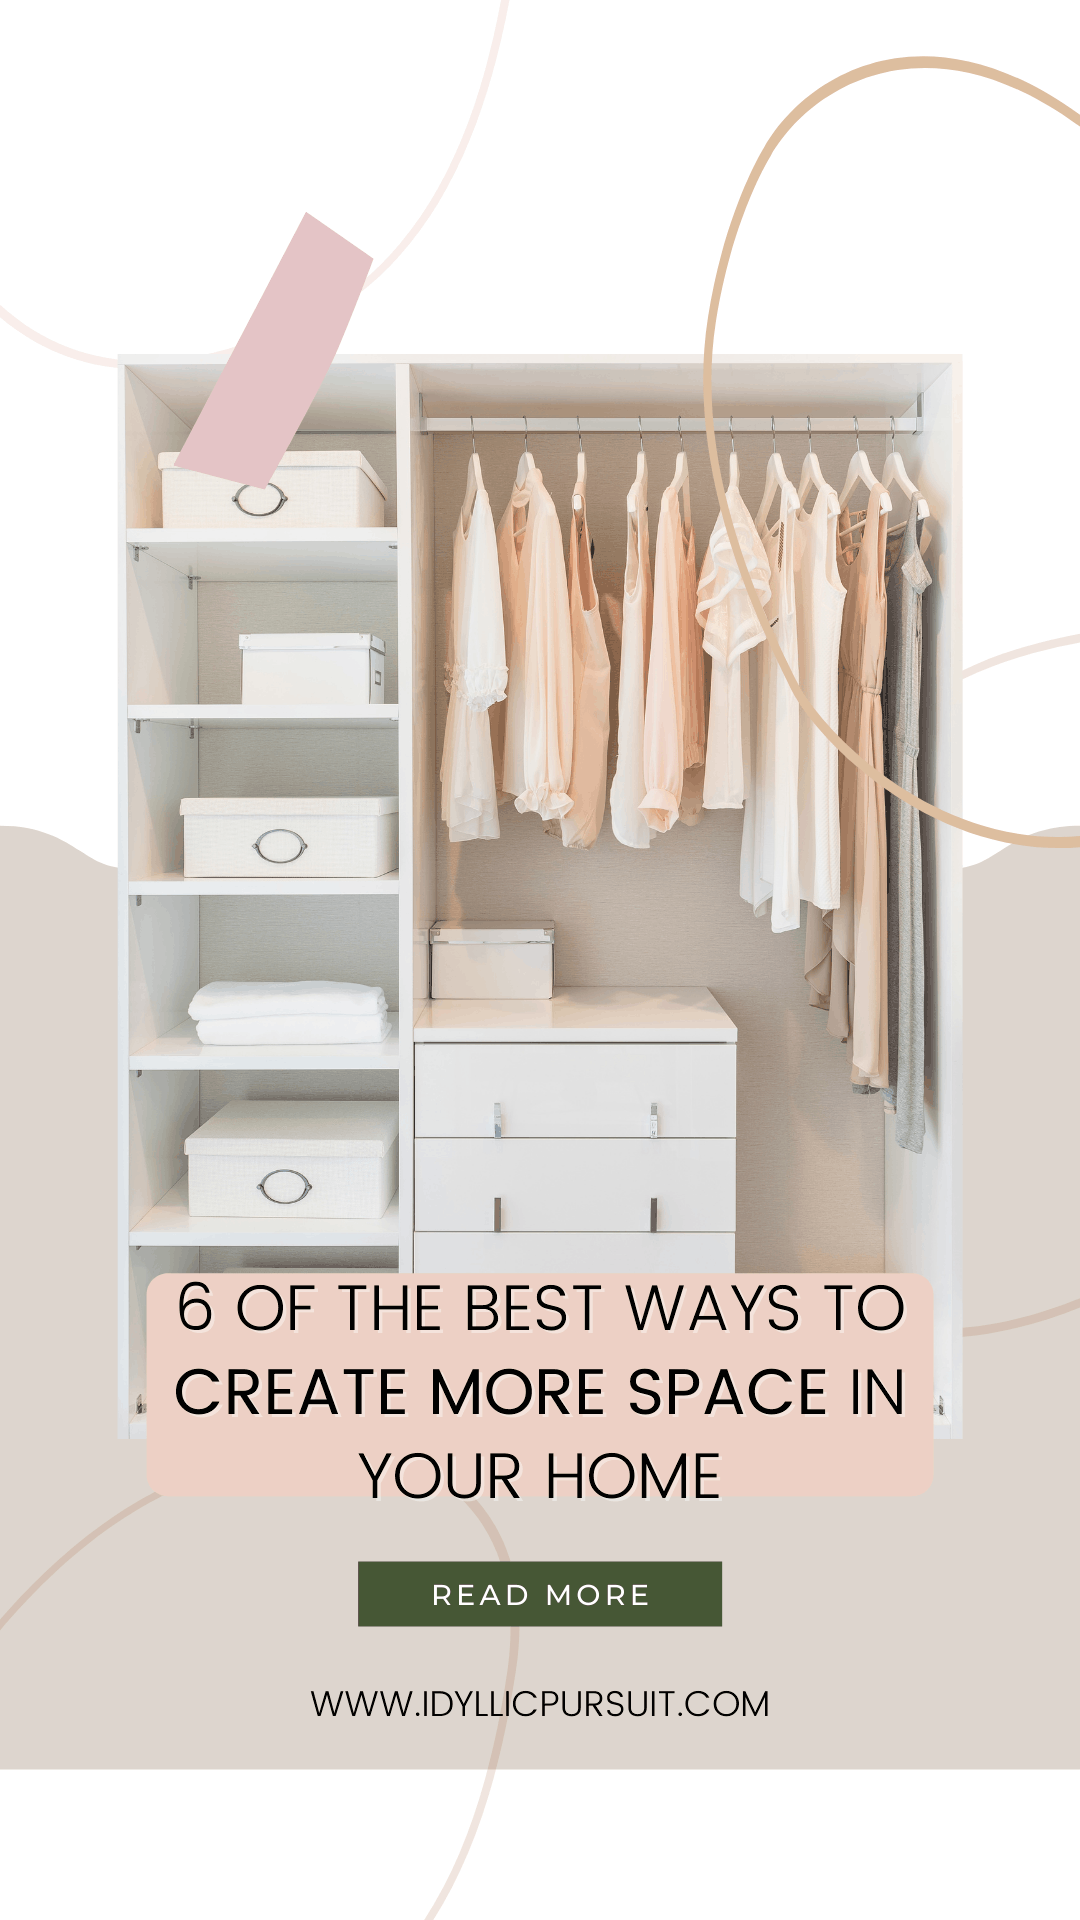 6 Ways to Create More Space In Your Home - Idyllic Pursuit